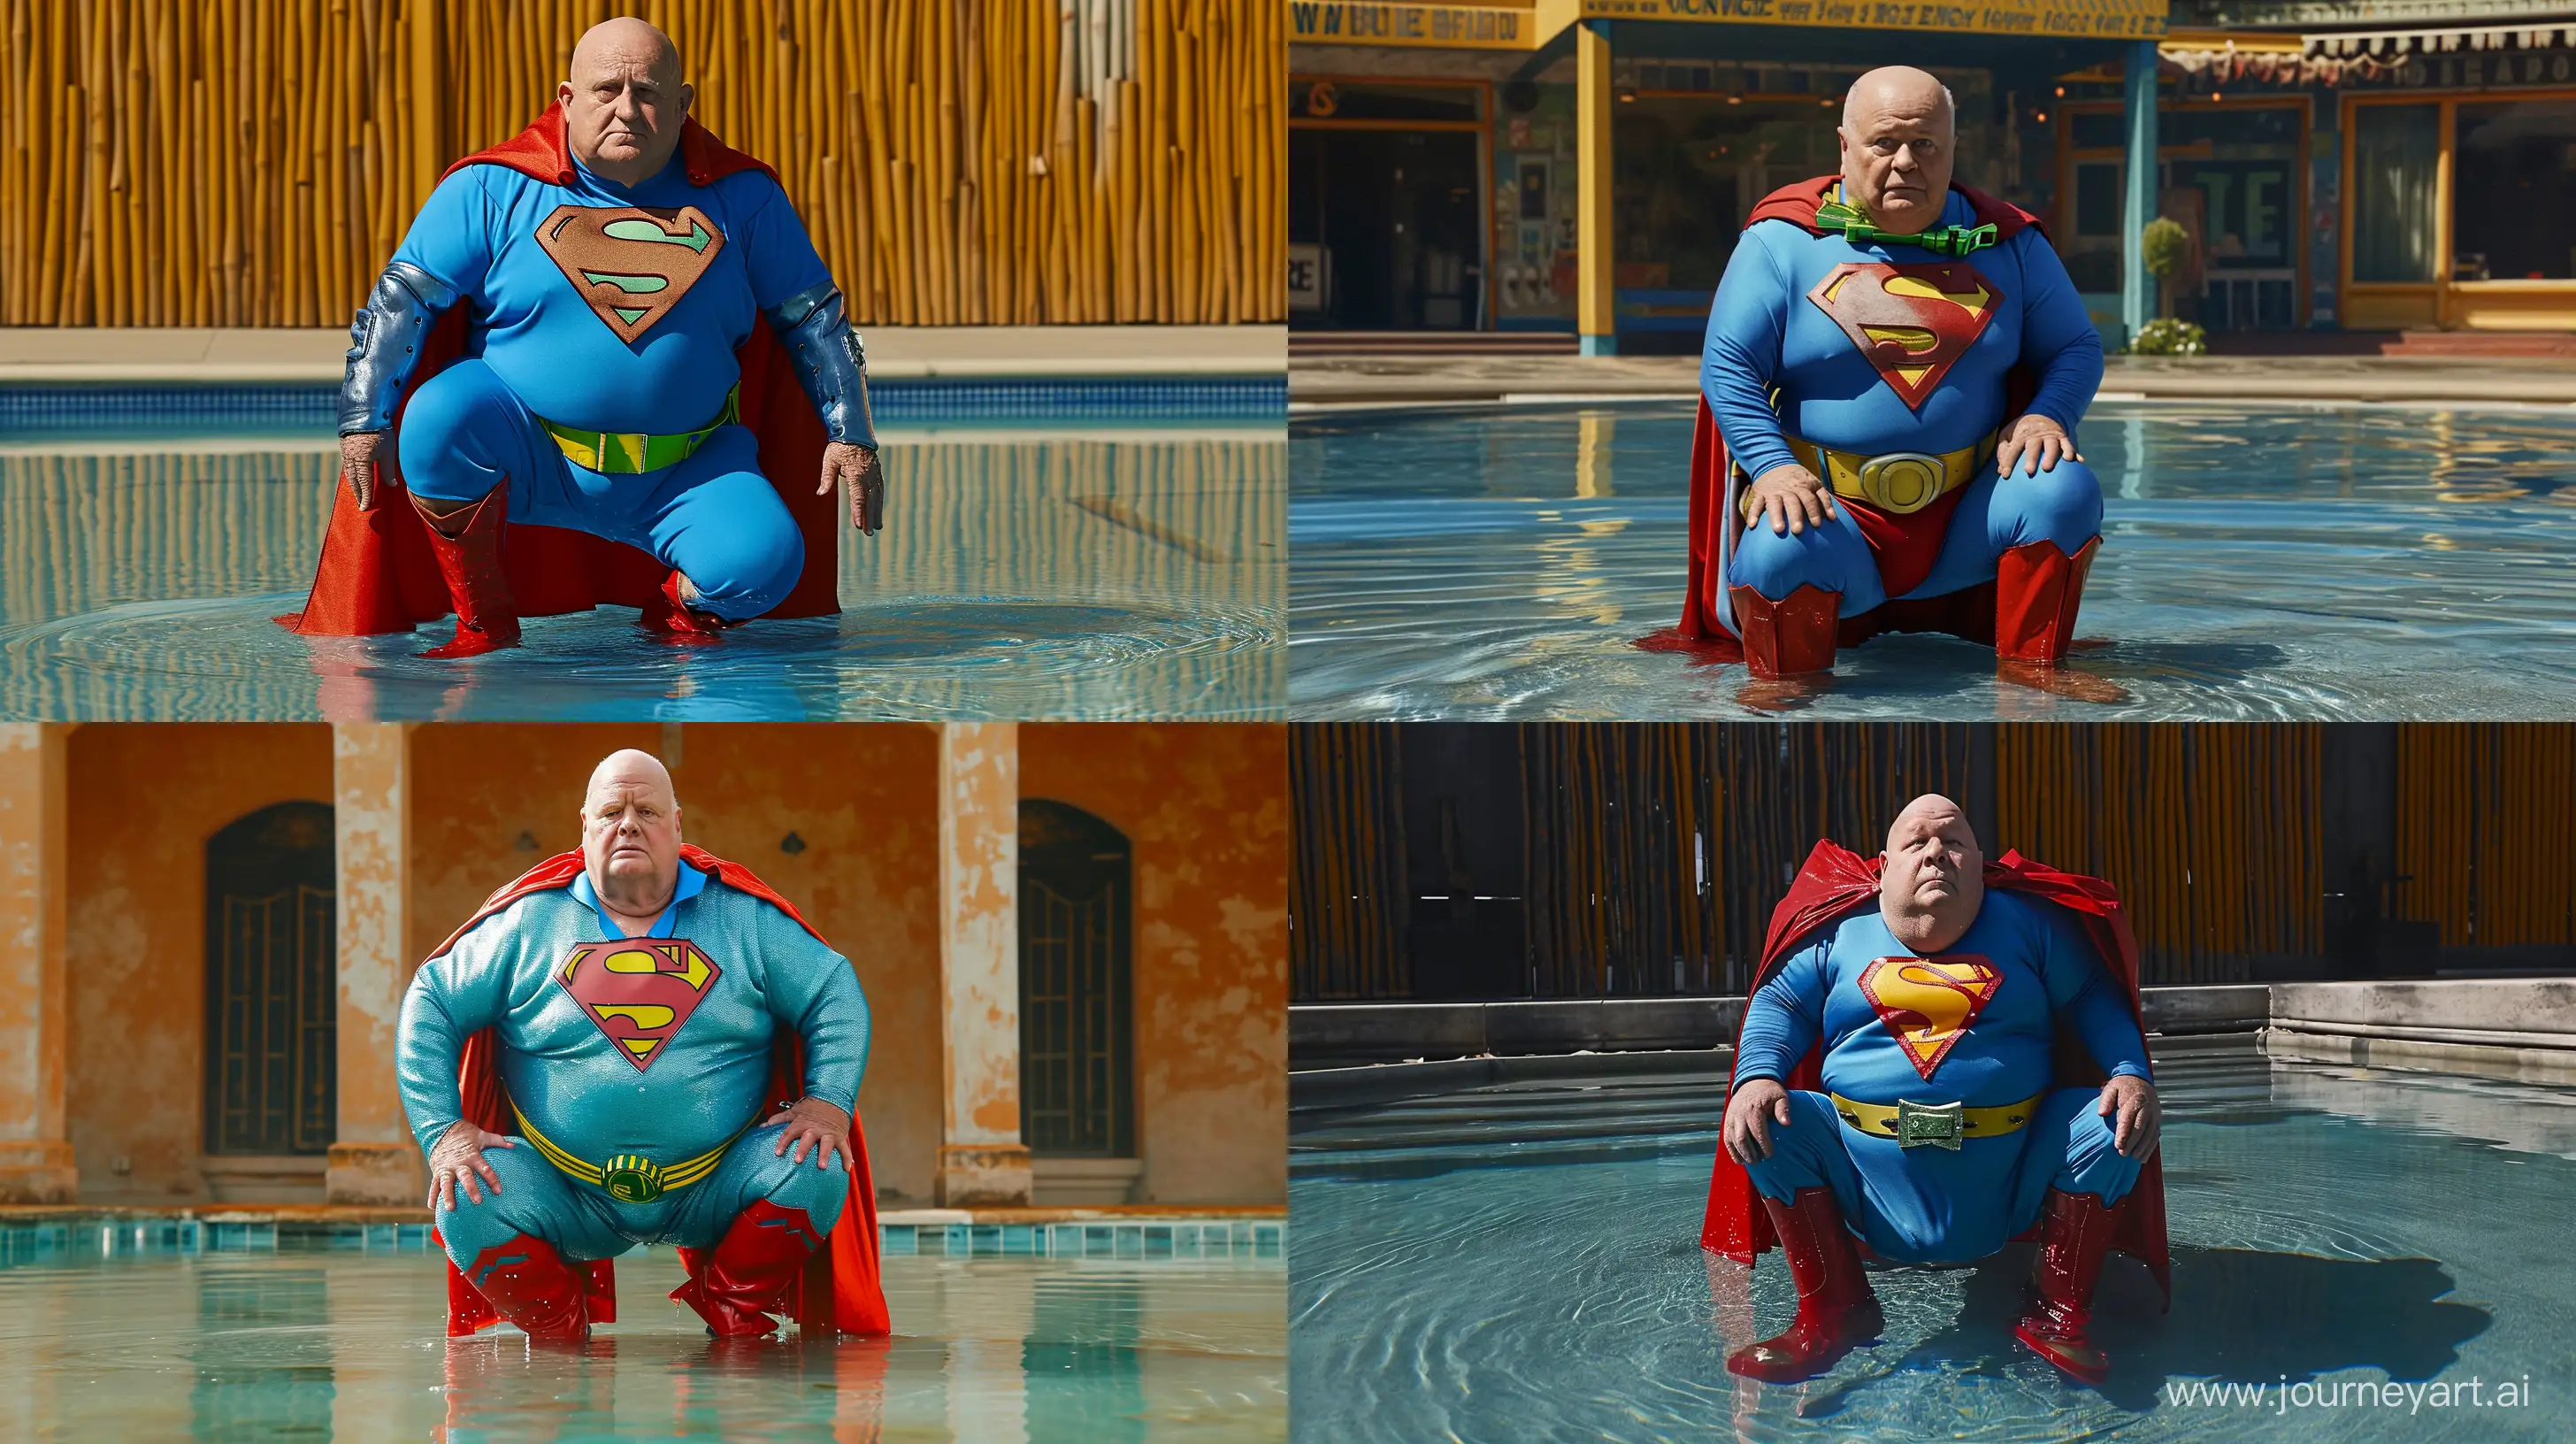 Eccentric-70YearOld-in-Vibrant-Superman-Costume-Kneeling-in-Shallow-Pool